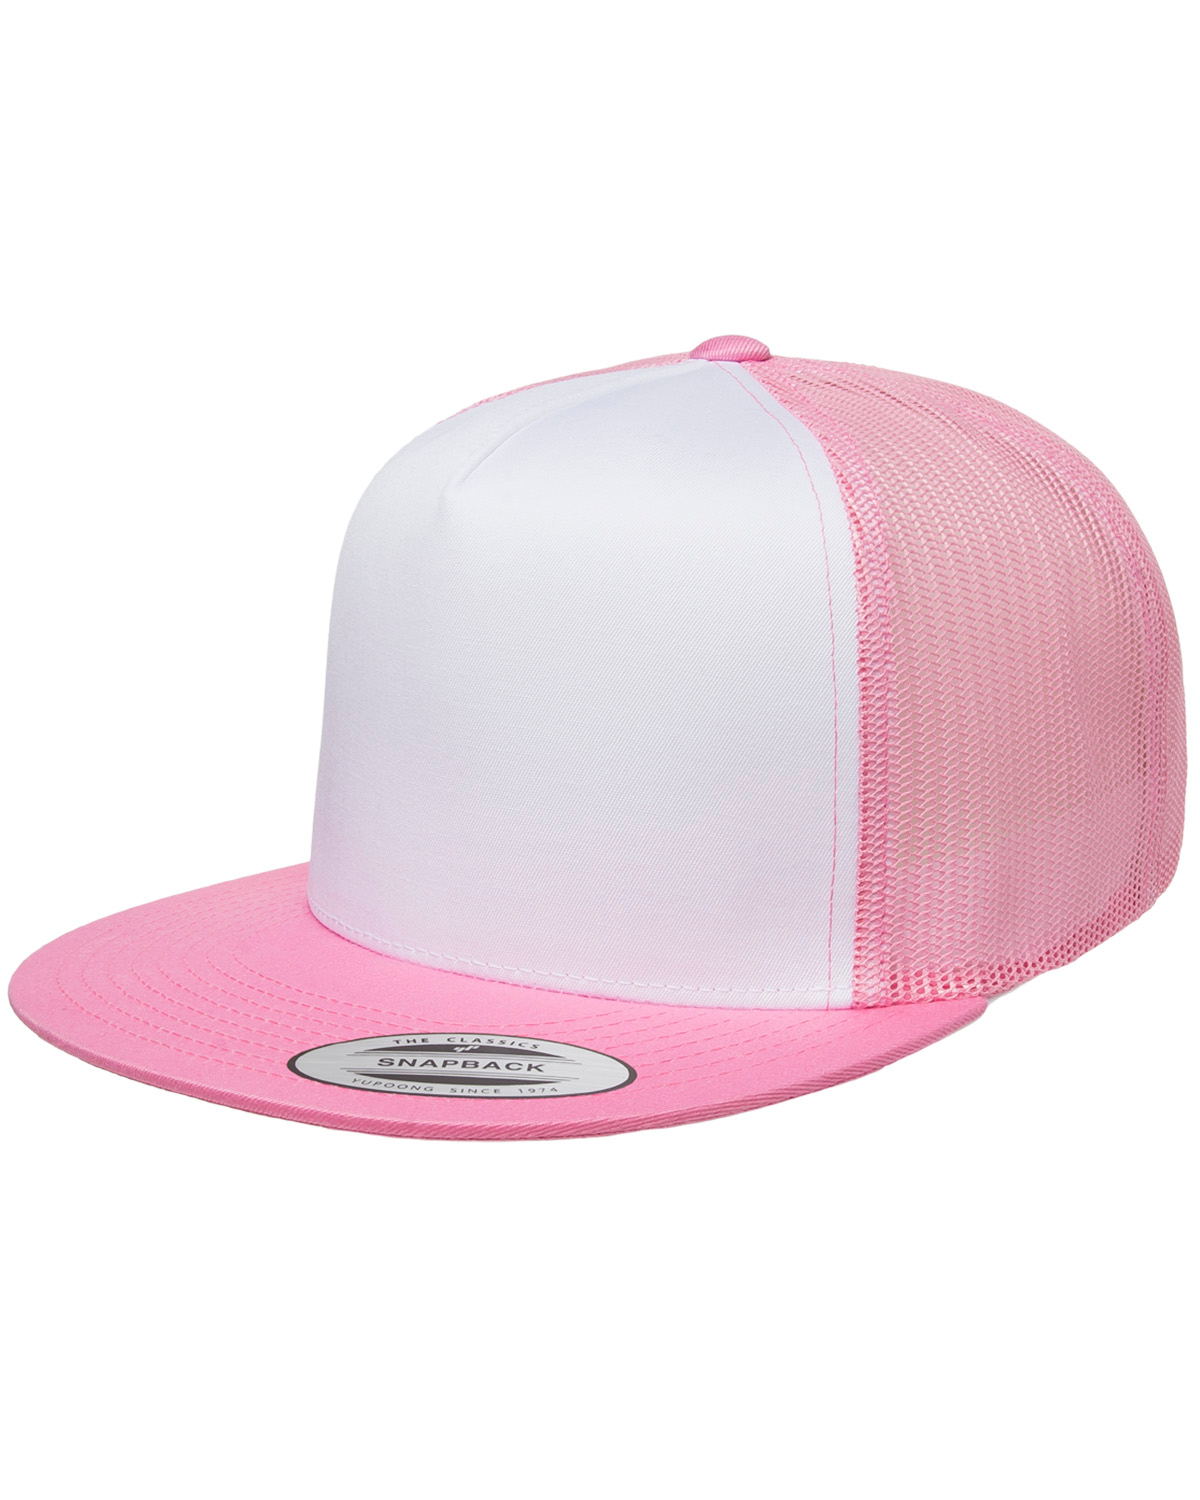 click to view Pink/ Wht/ Pink